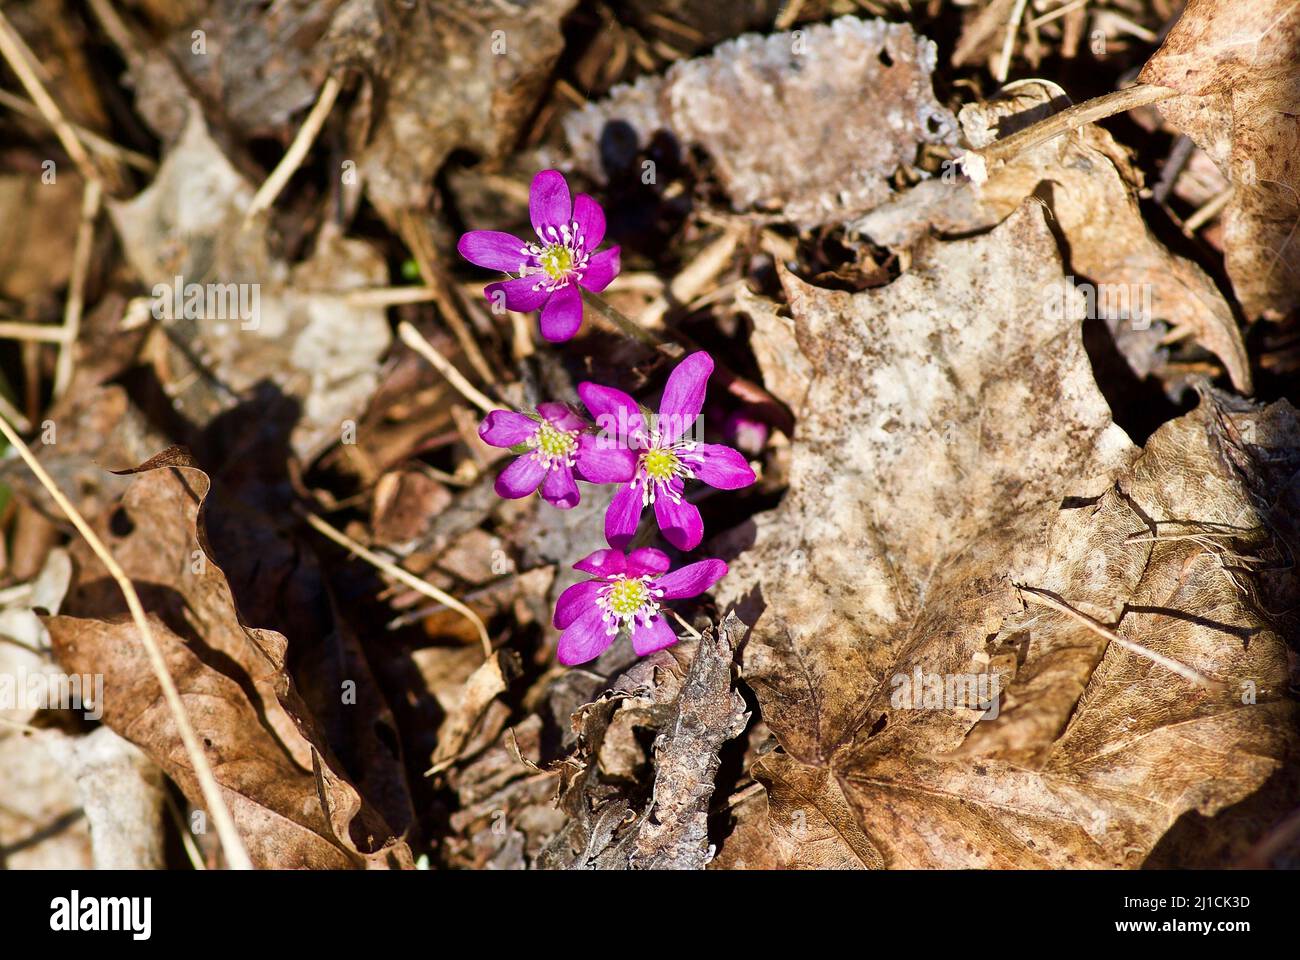 Group of flowering red hepatica nobilis growing among old brown leaves in forest in spring. Stock Photo